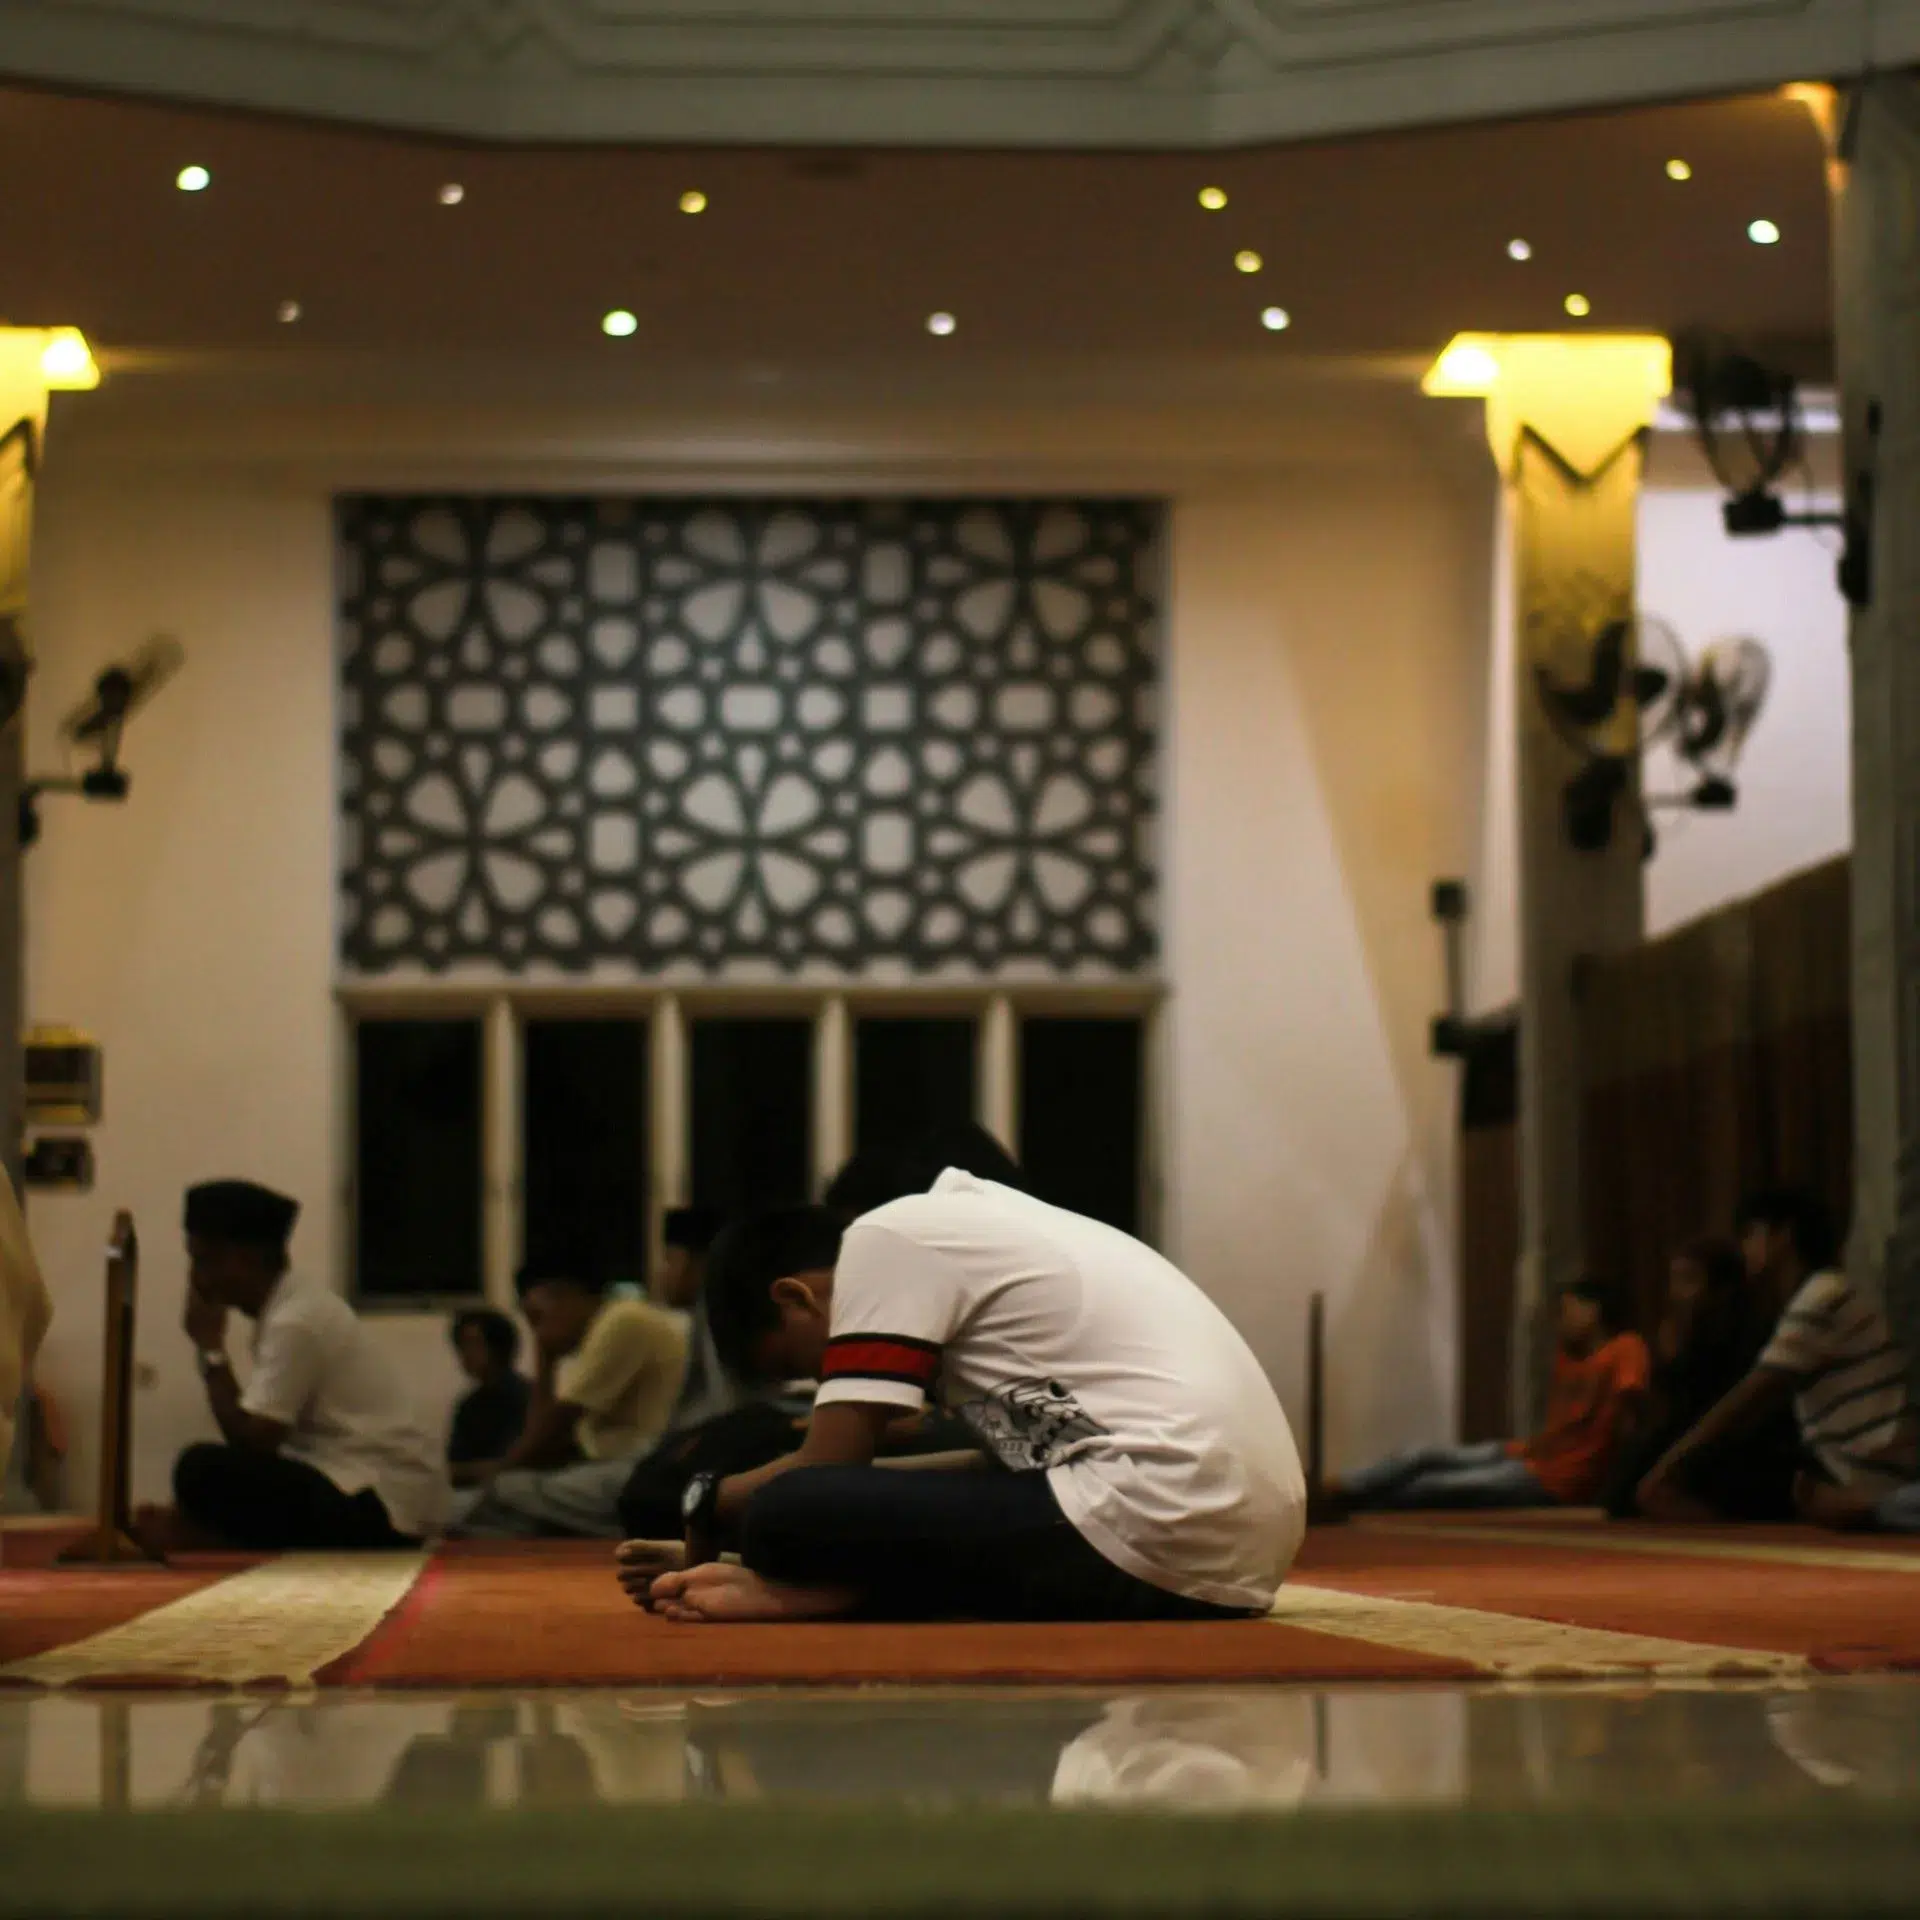 A person is sitting in contemplation and prayer in a mosque, embodying the reflective and devotional spirit of the Three Ashras of Ramadan.